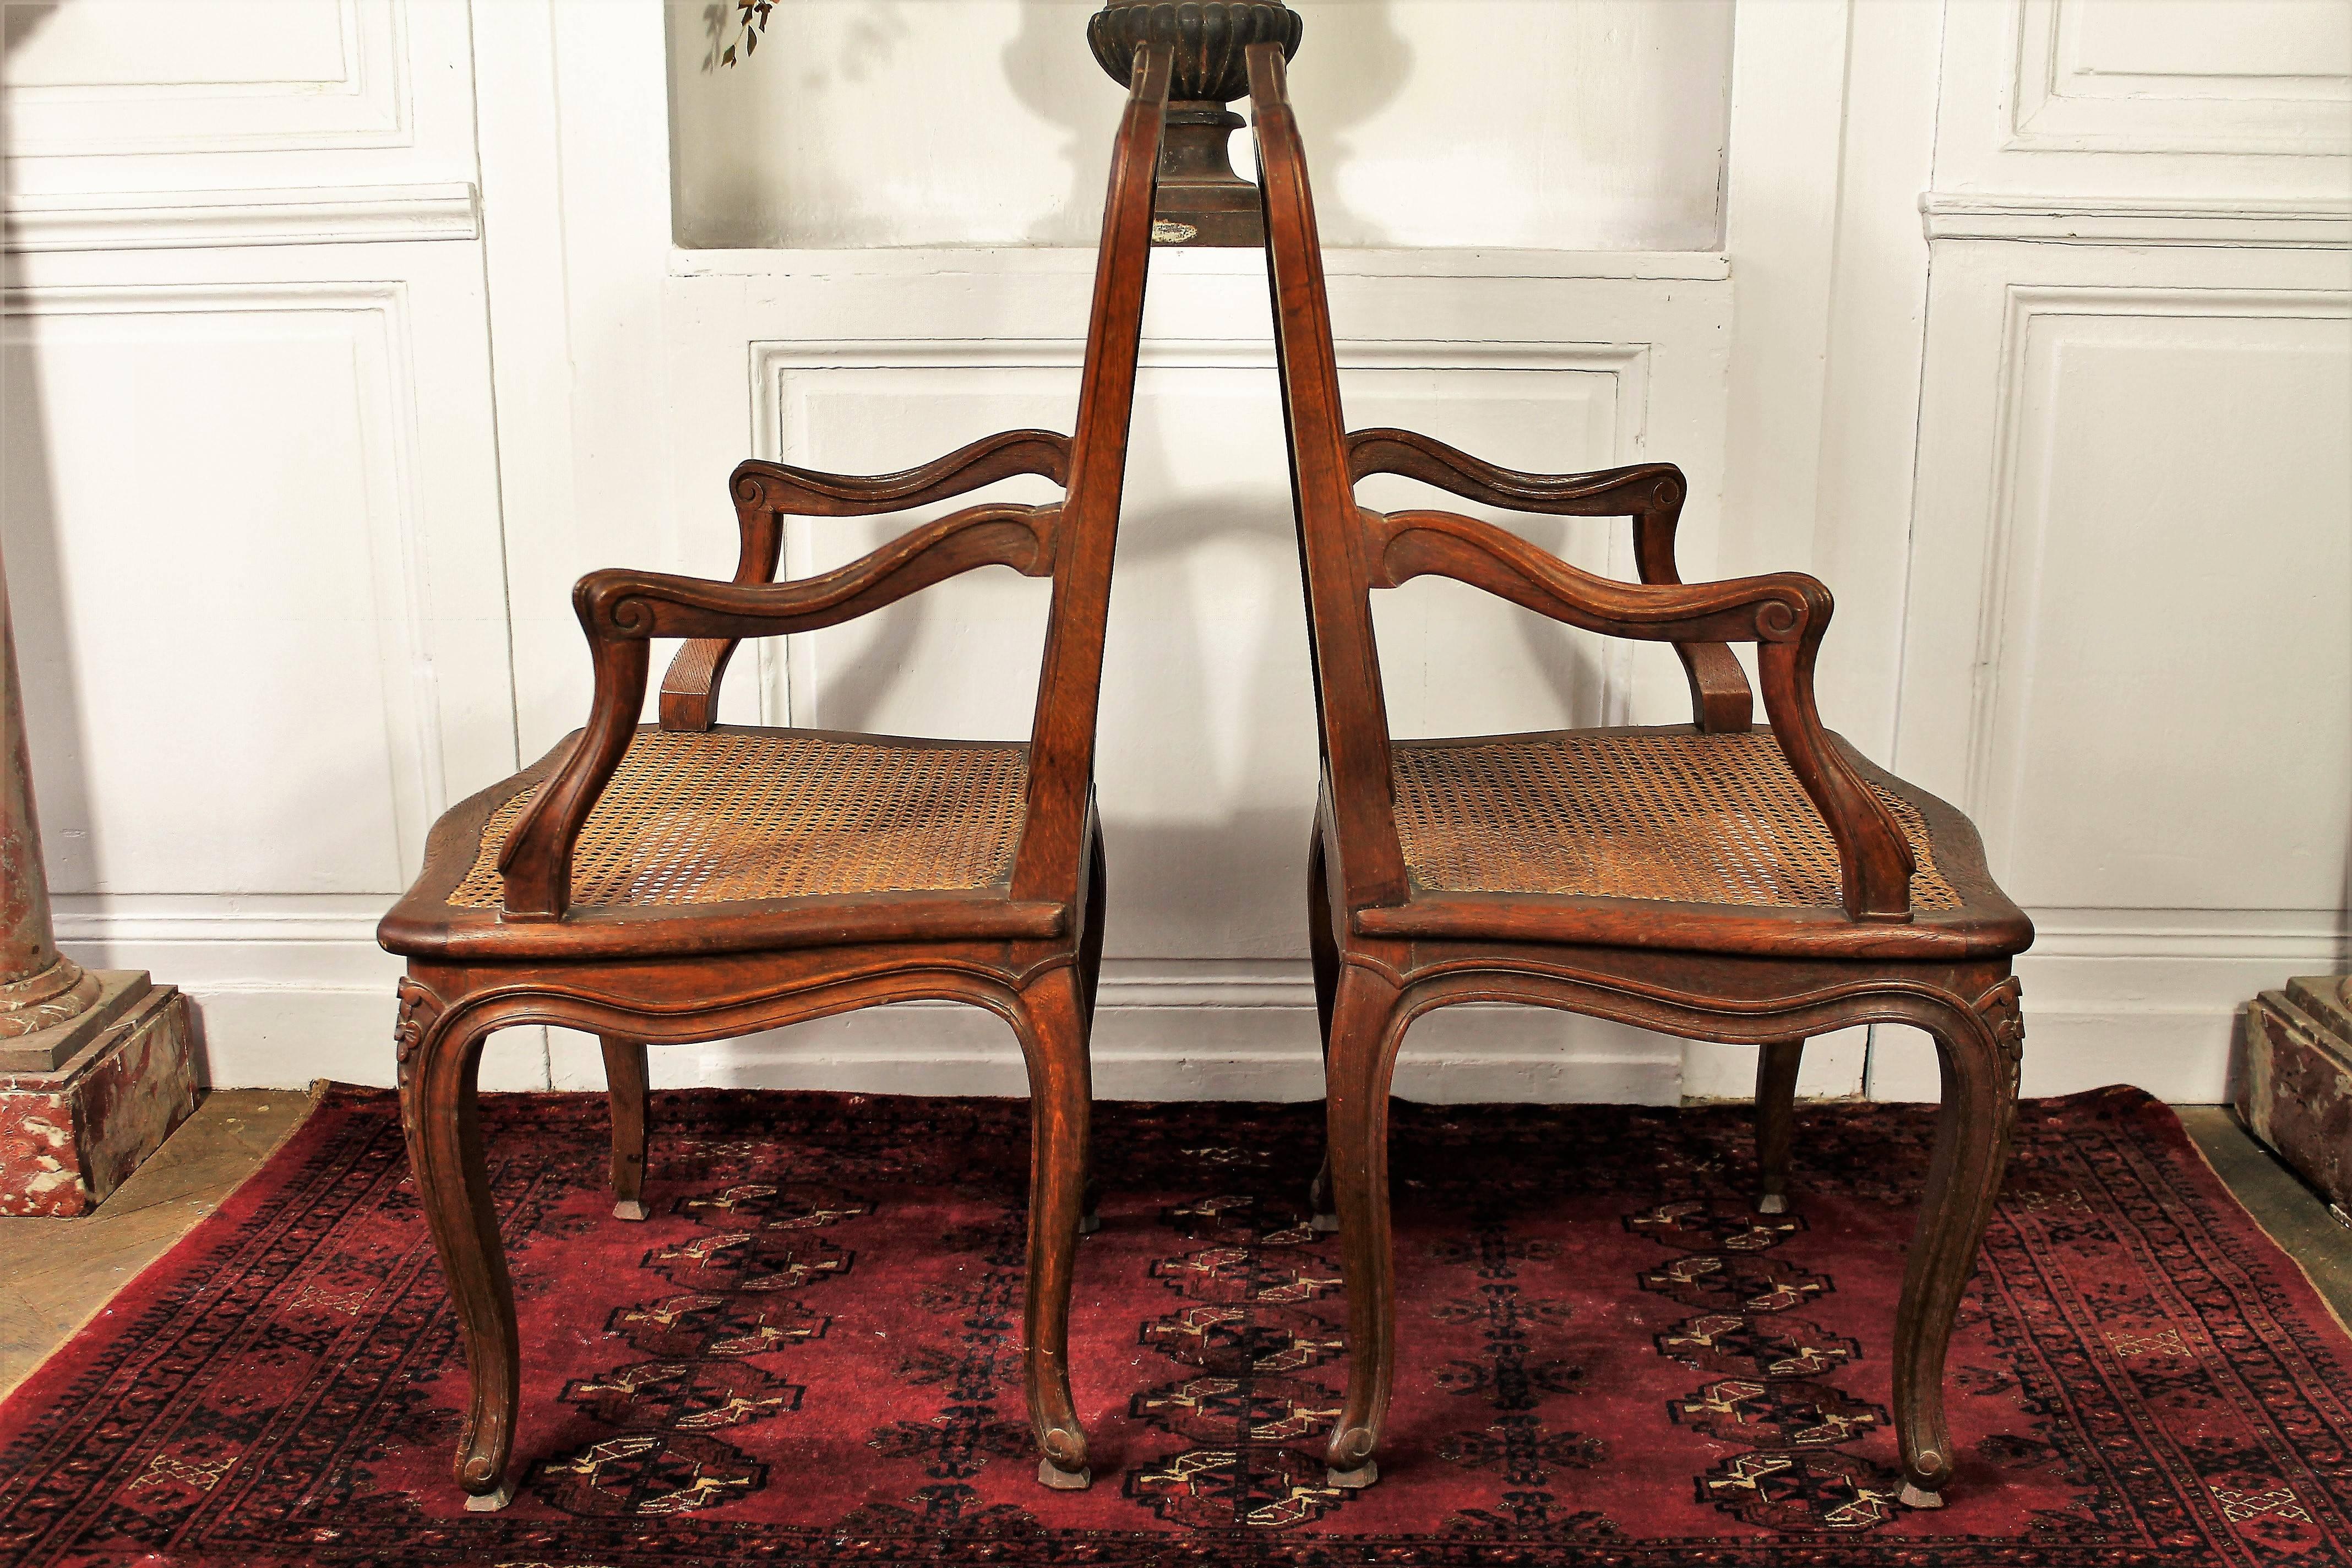 Pair of Louis XV style hand-carved armchairs in oak, seat and back caning.
France;
Second part of the 19th century.